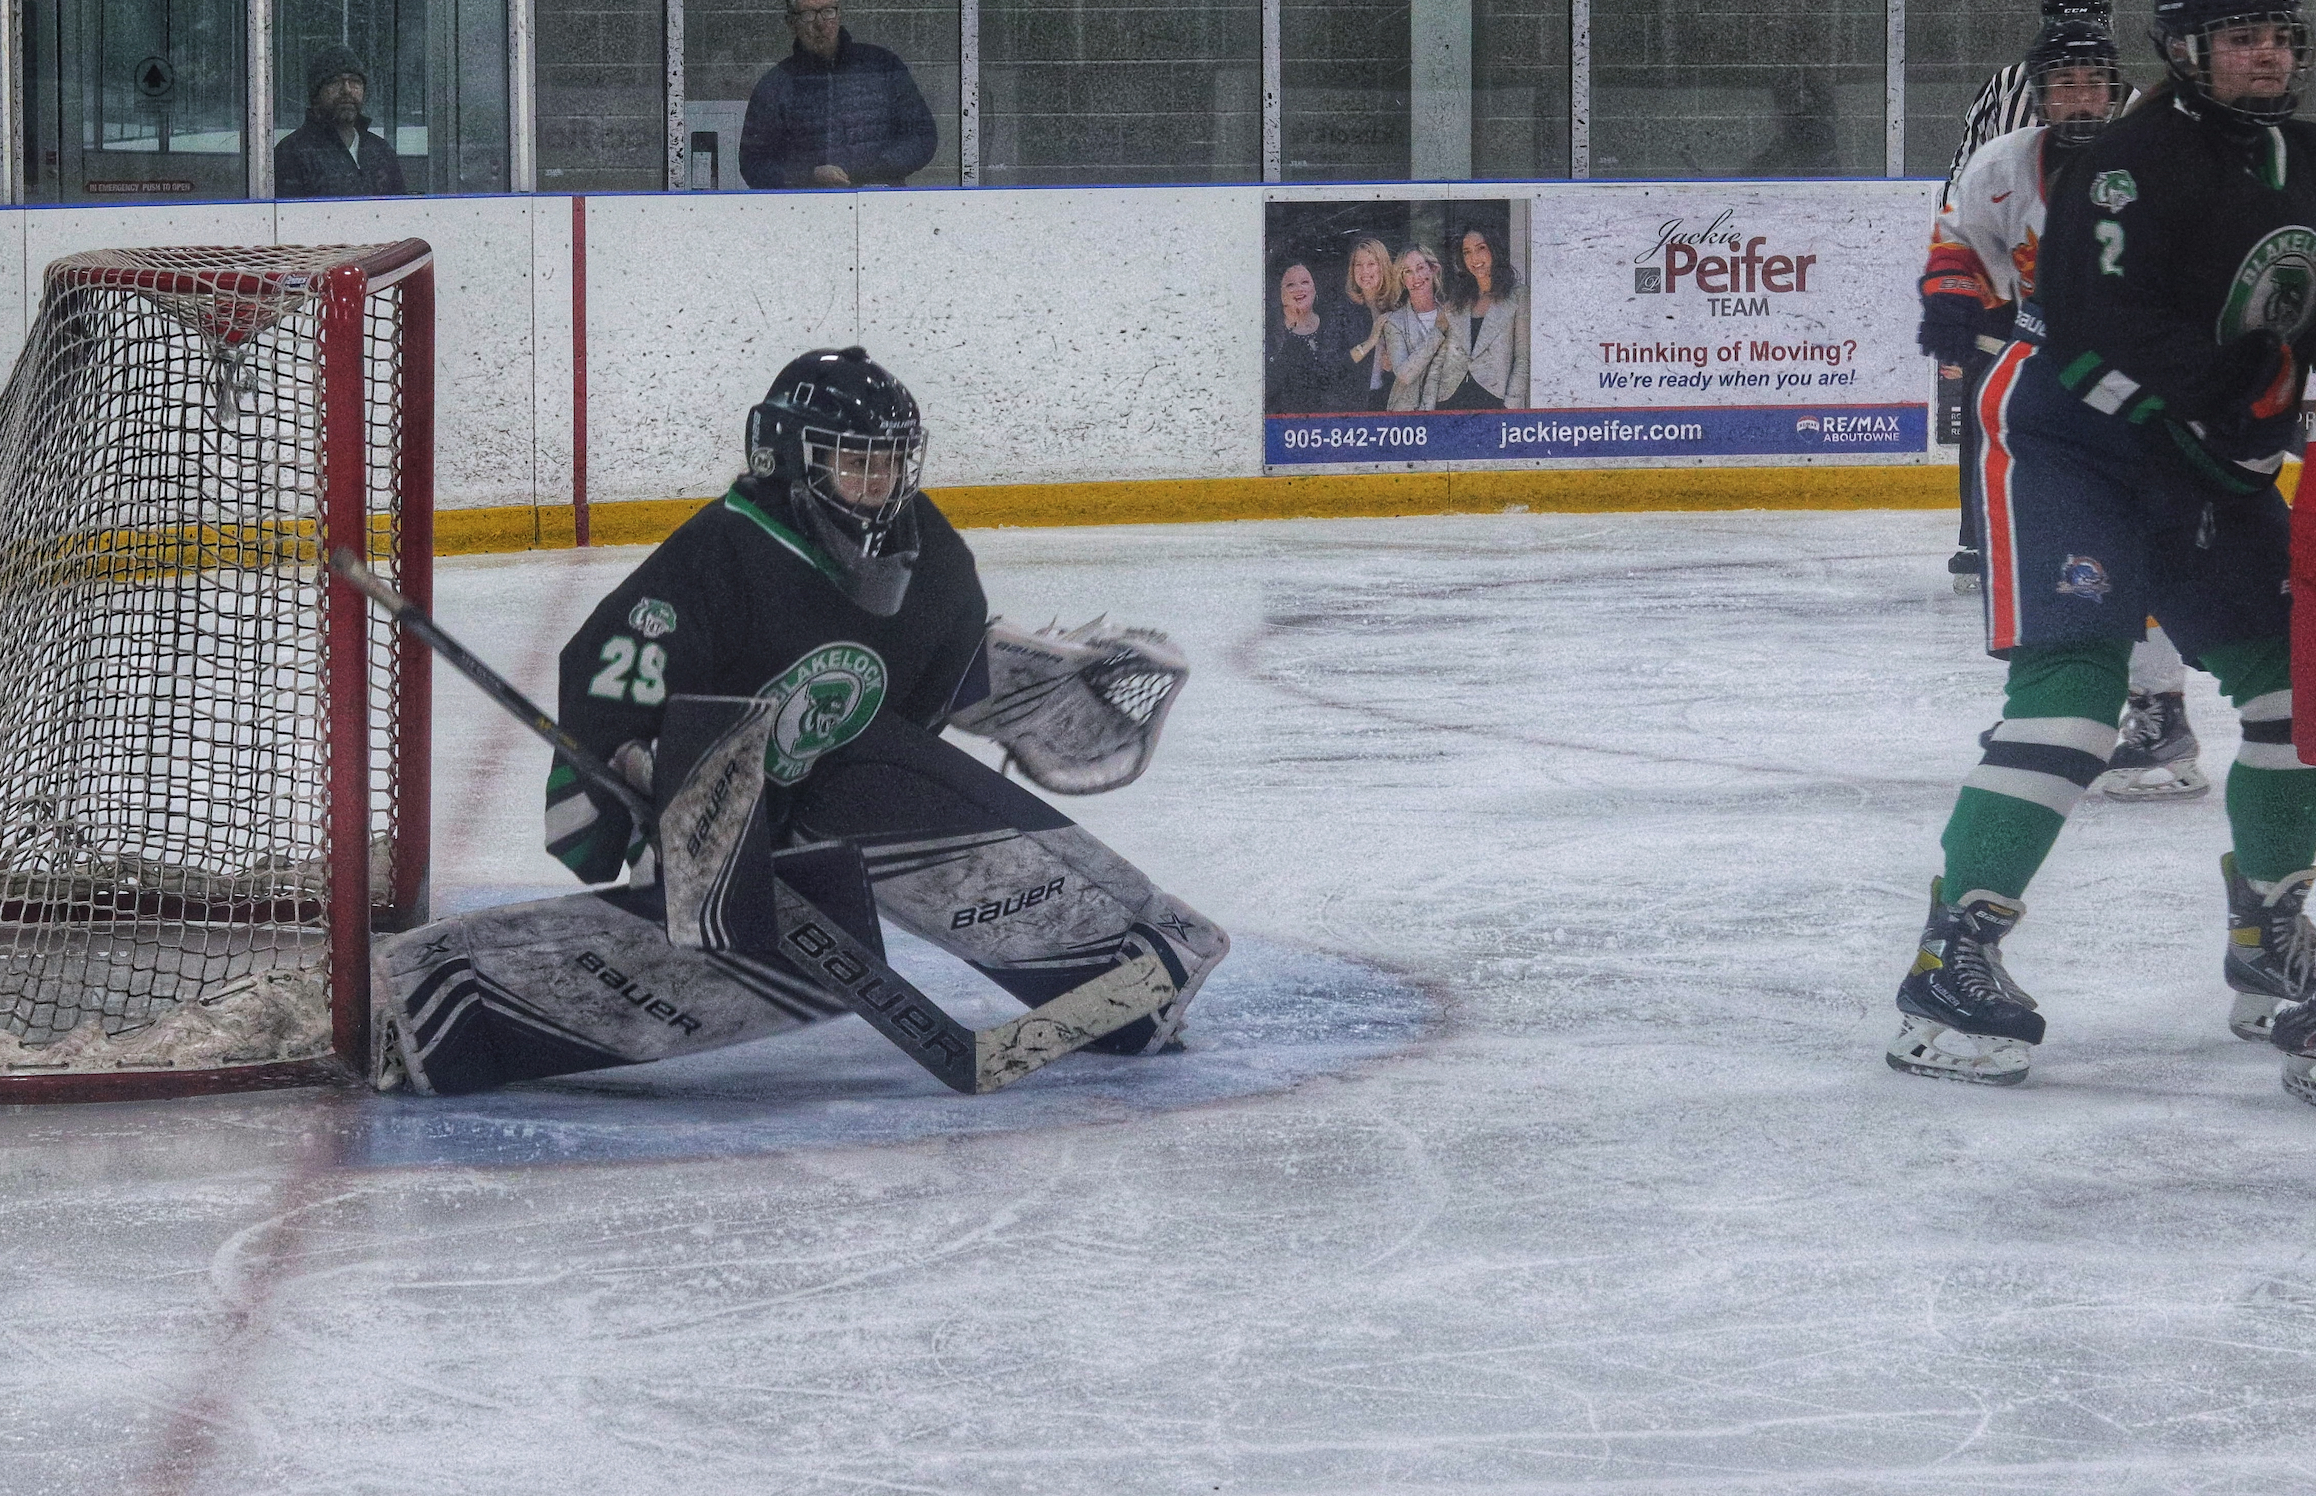 Audrey Cabaday stands her ground | Blakelock faced a never ending onslaught in the 3rd period of Friday